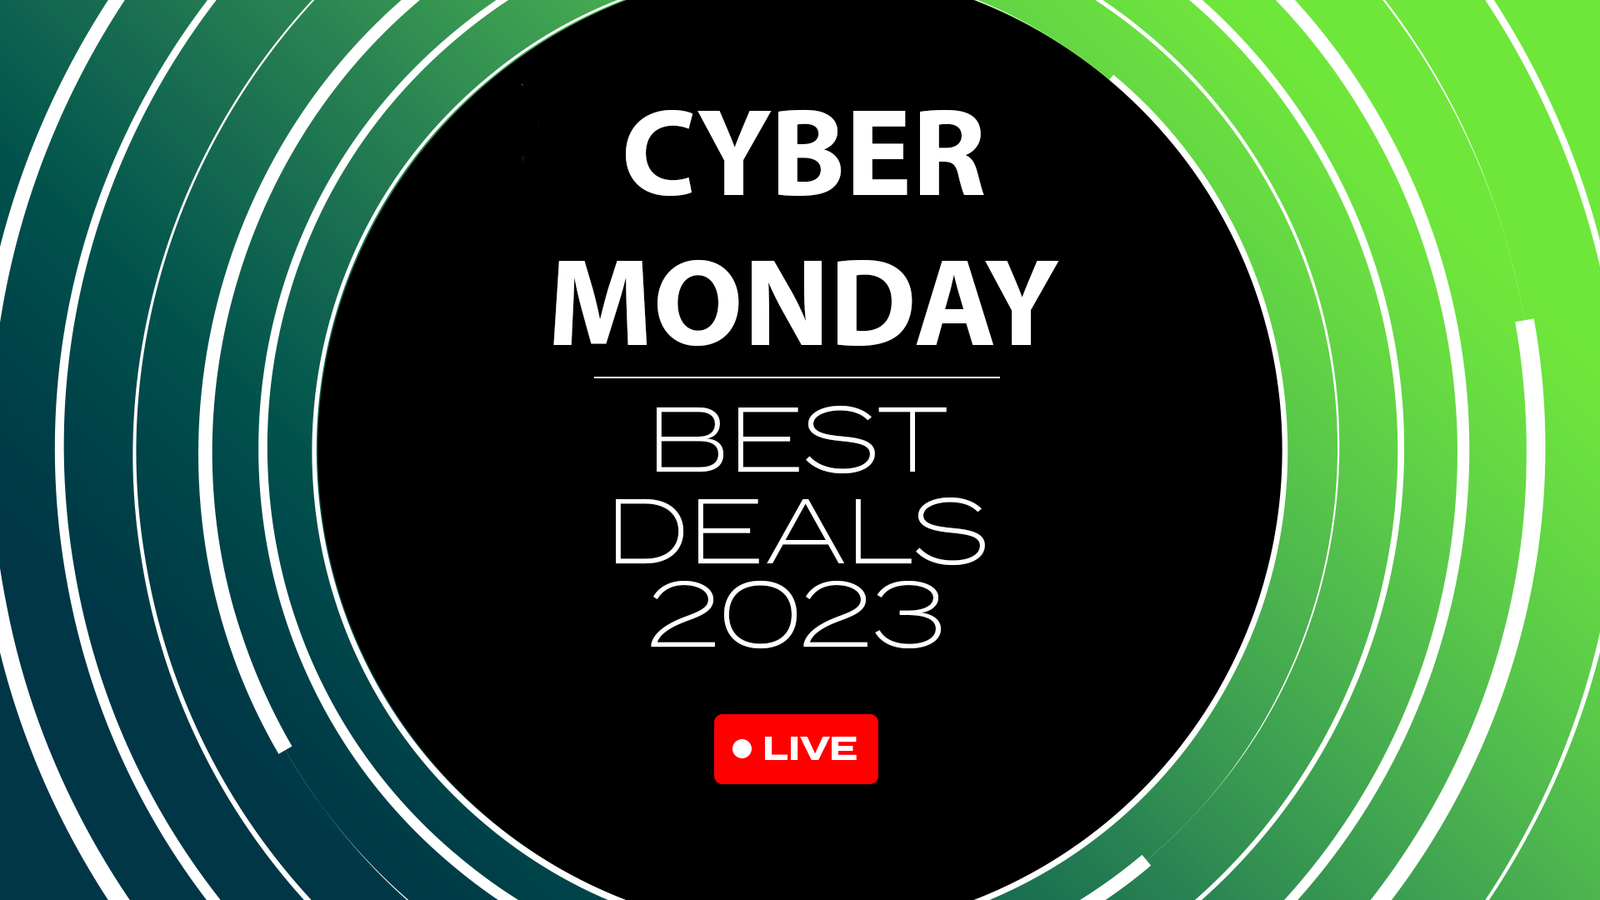 Live Updates: 100+ Best Cyber Monday Deals of 2023 from Experts